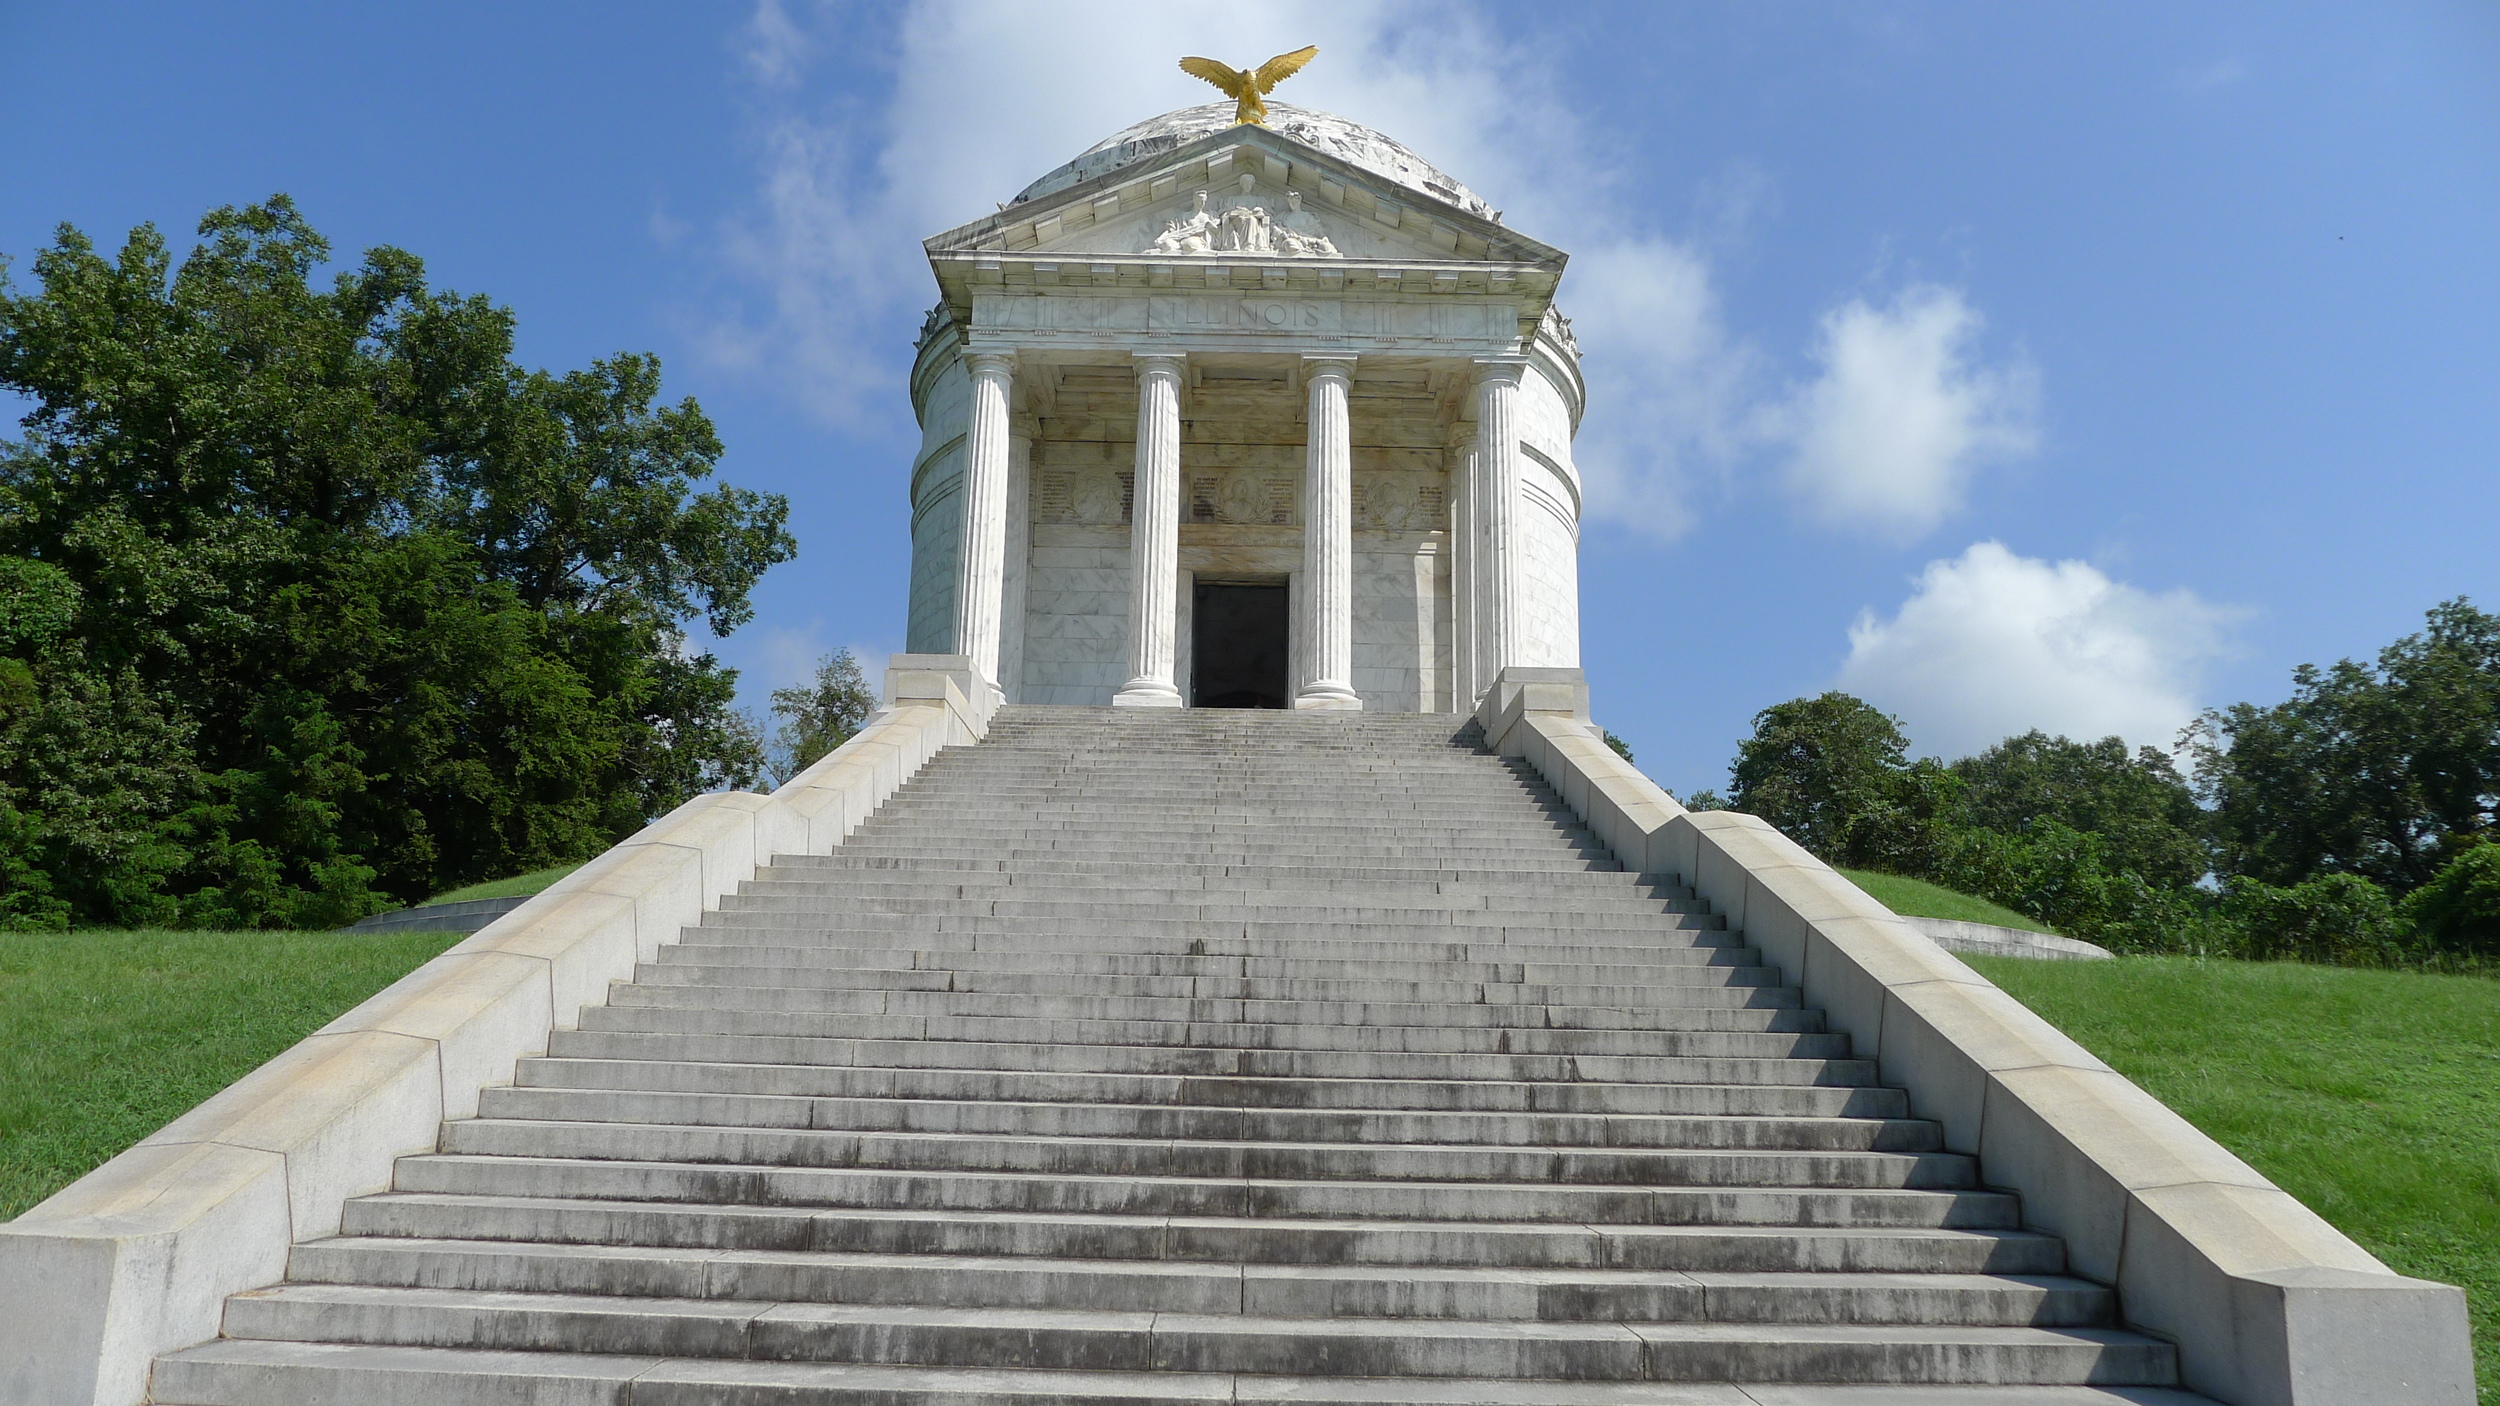 The Illinois Memorial at the Park.